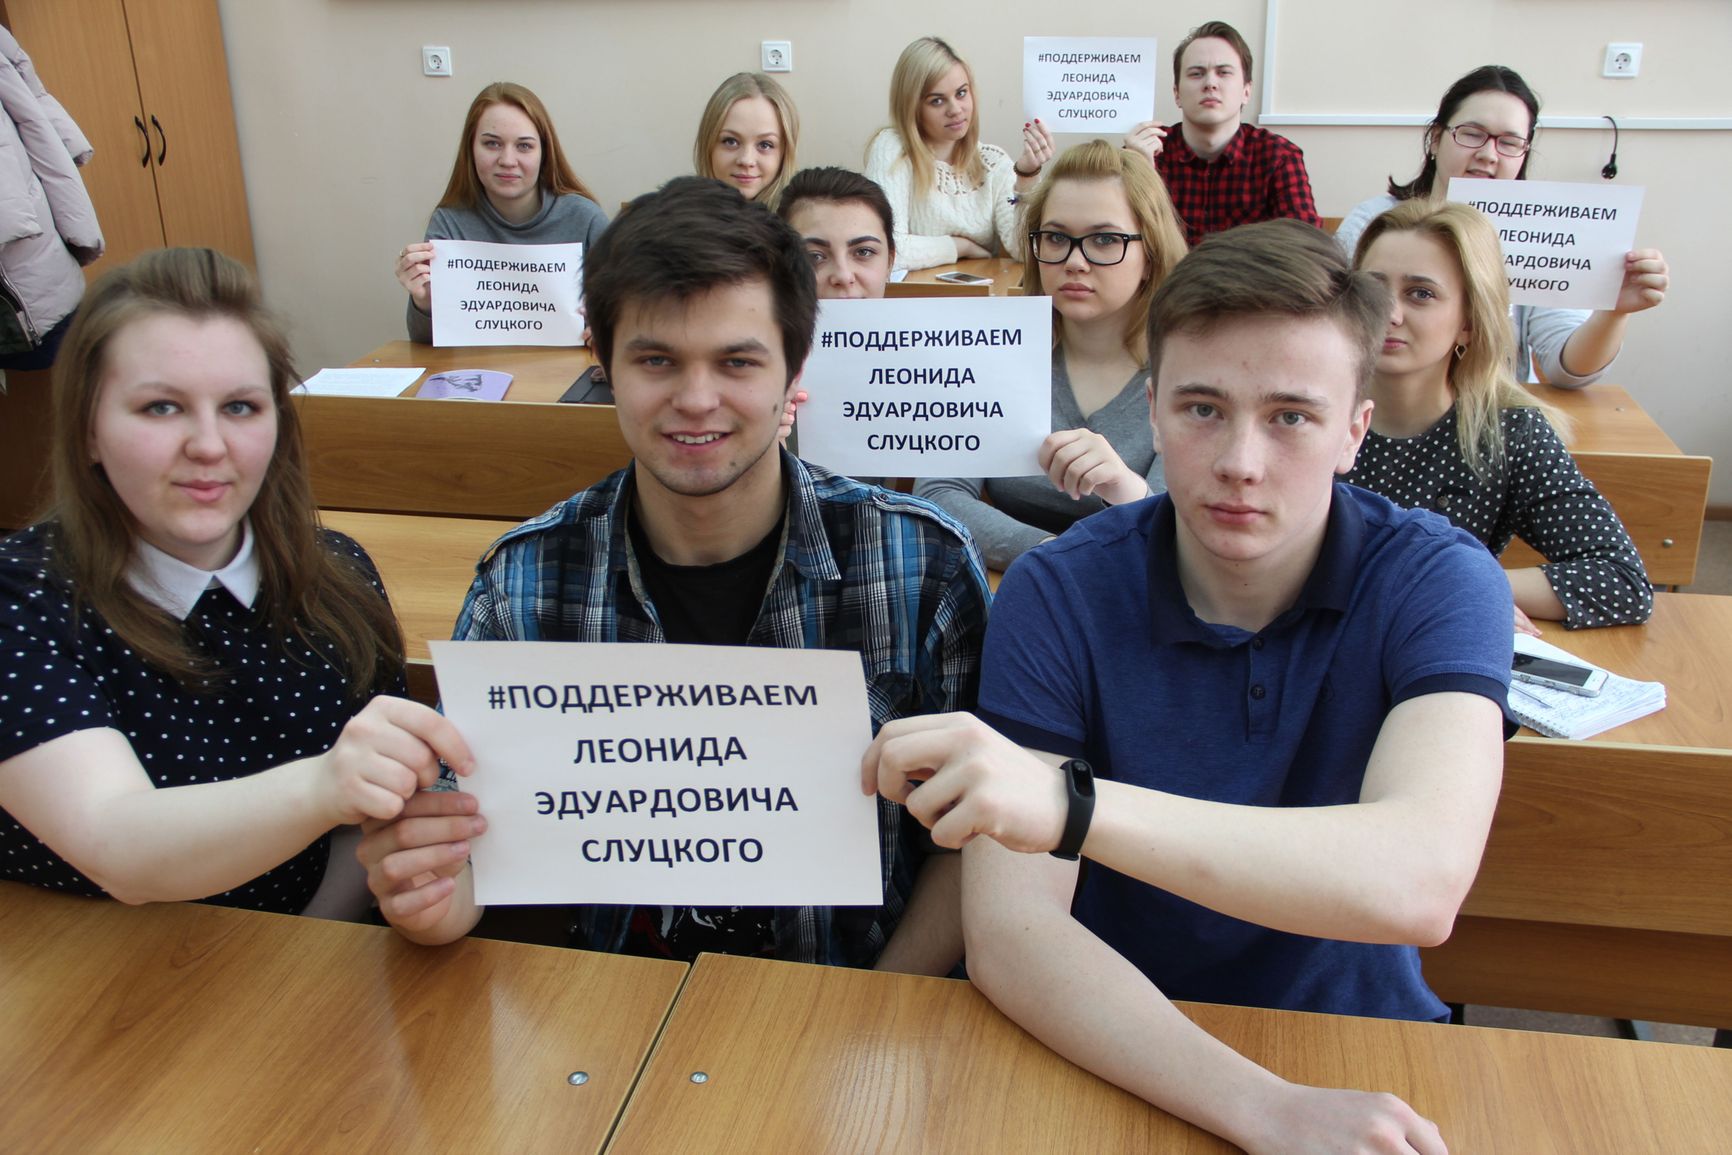 Students hold placards in support of Leonid Slutsky